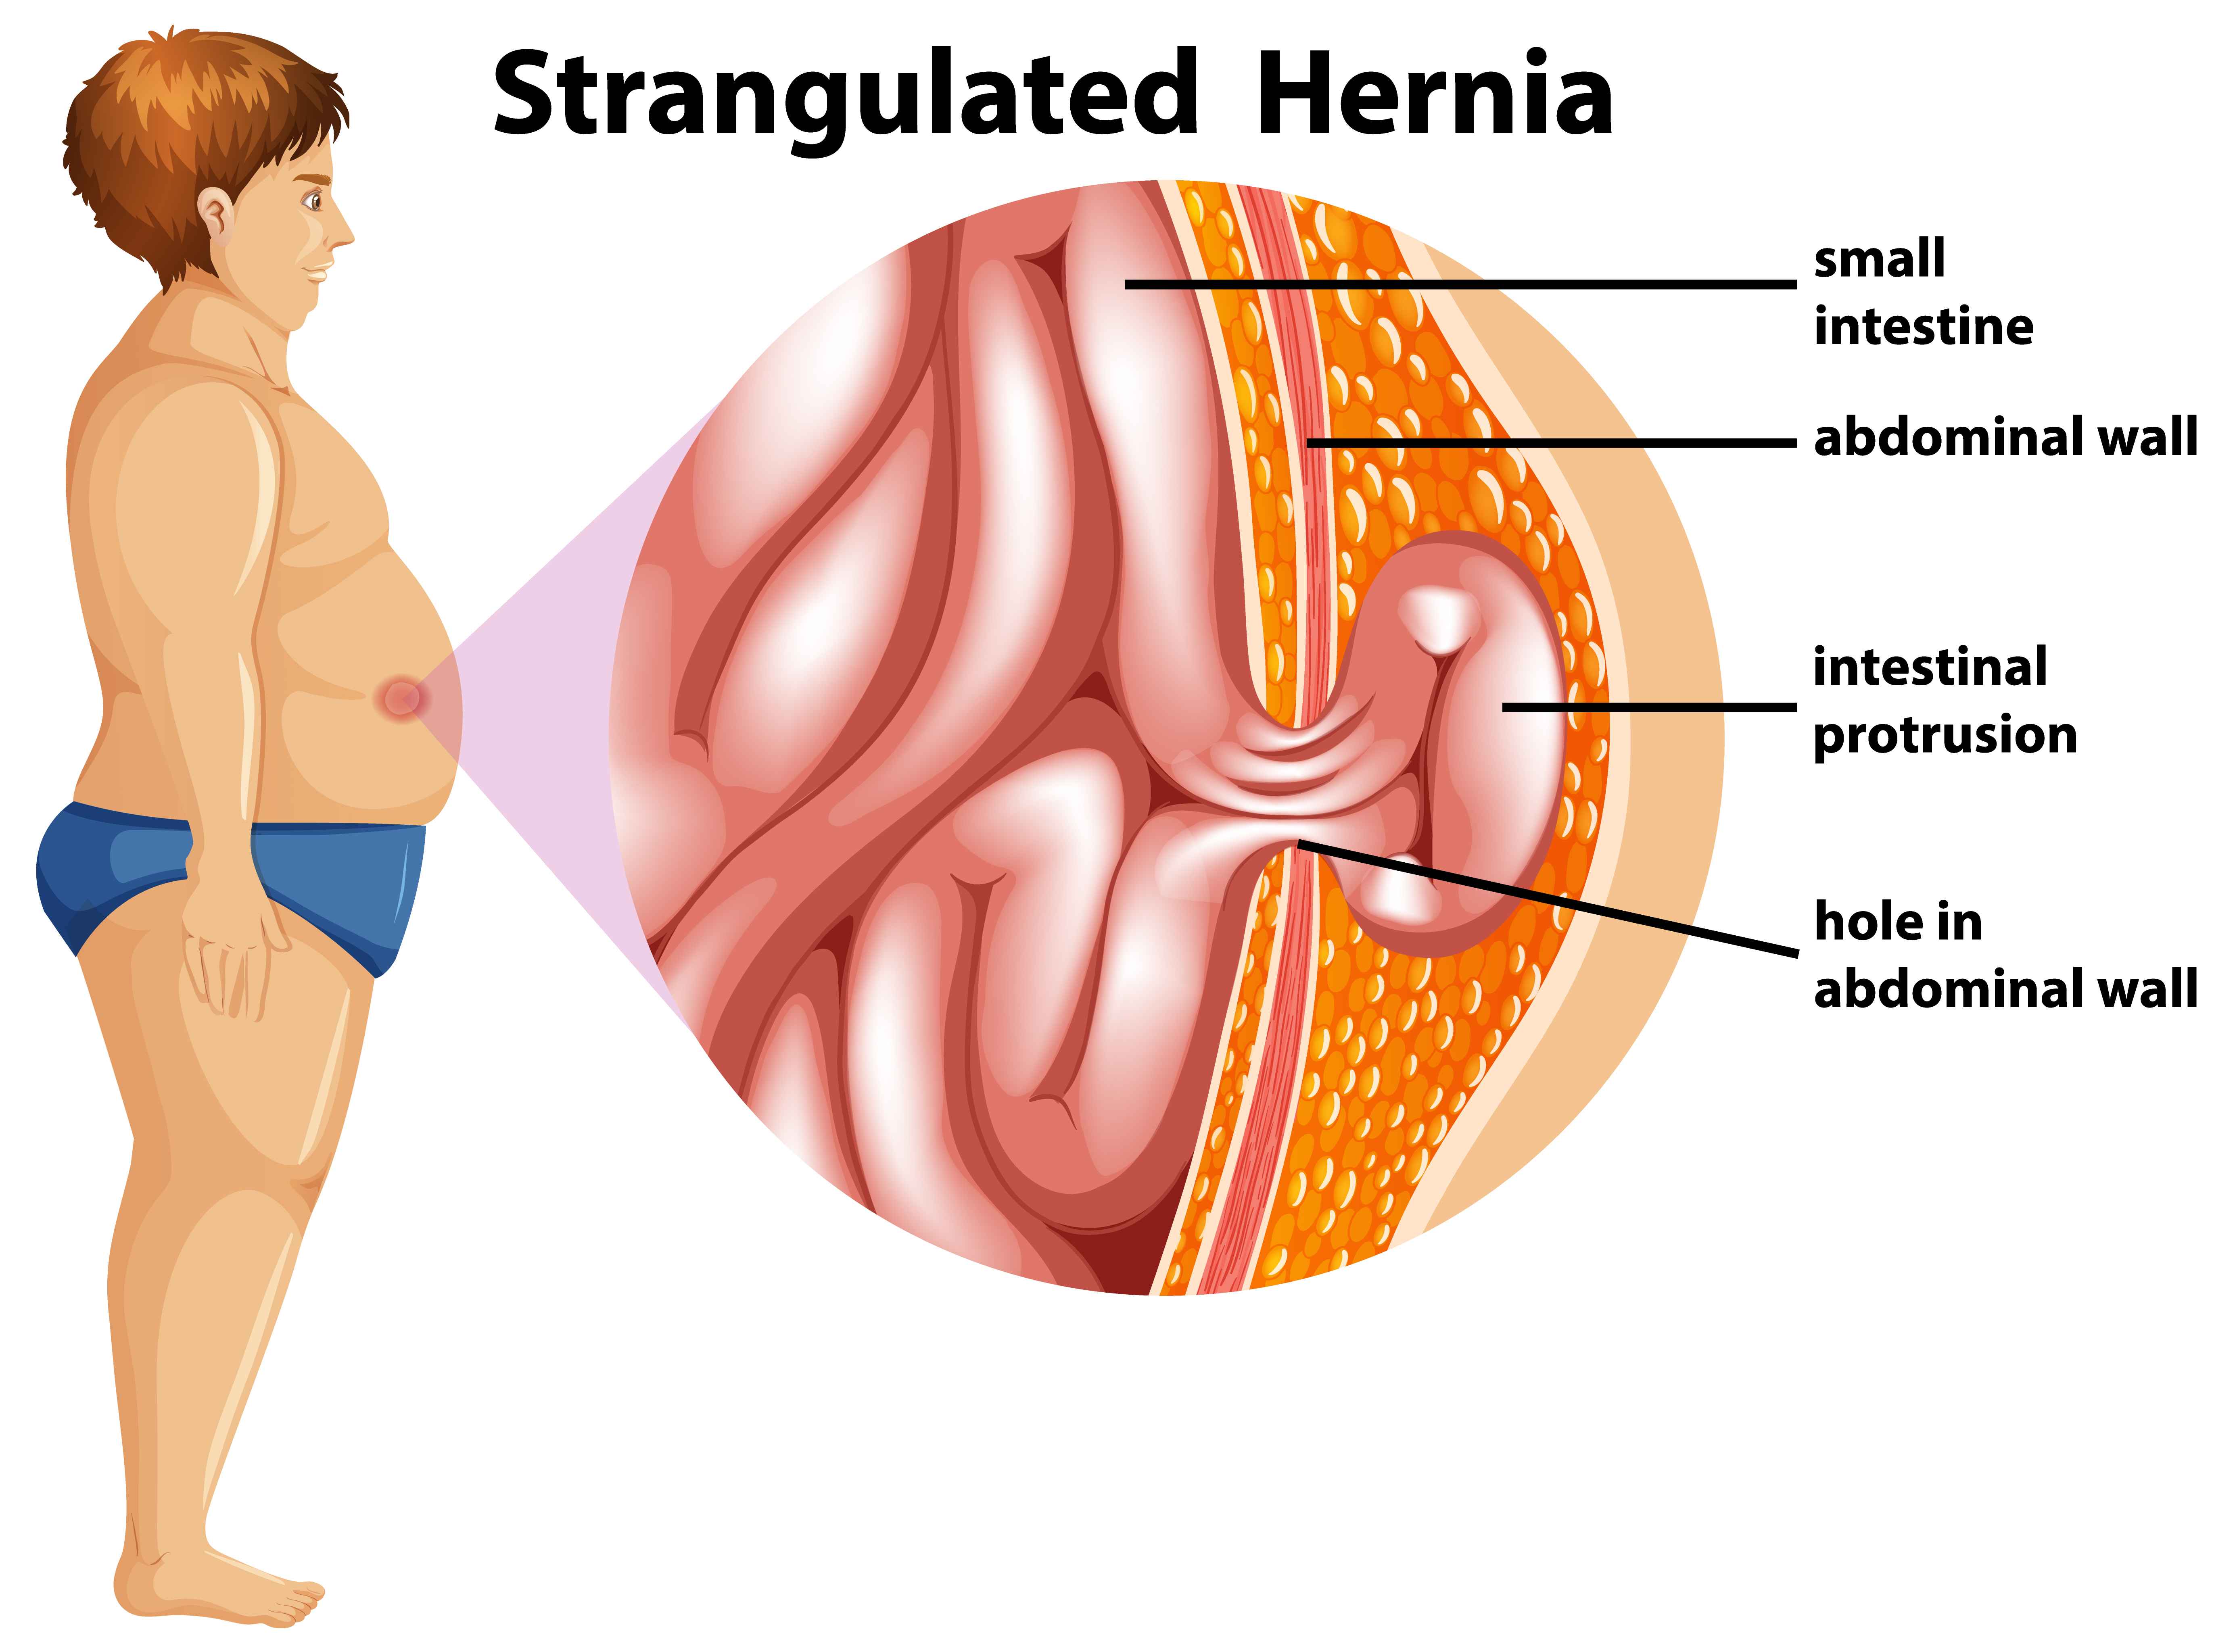 Visual presentation of a person and magnified strangulated hernia